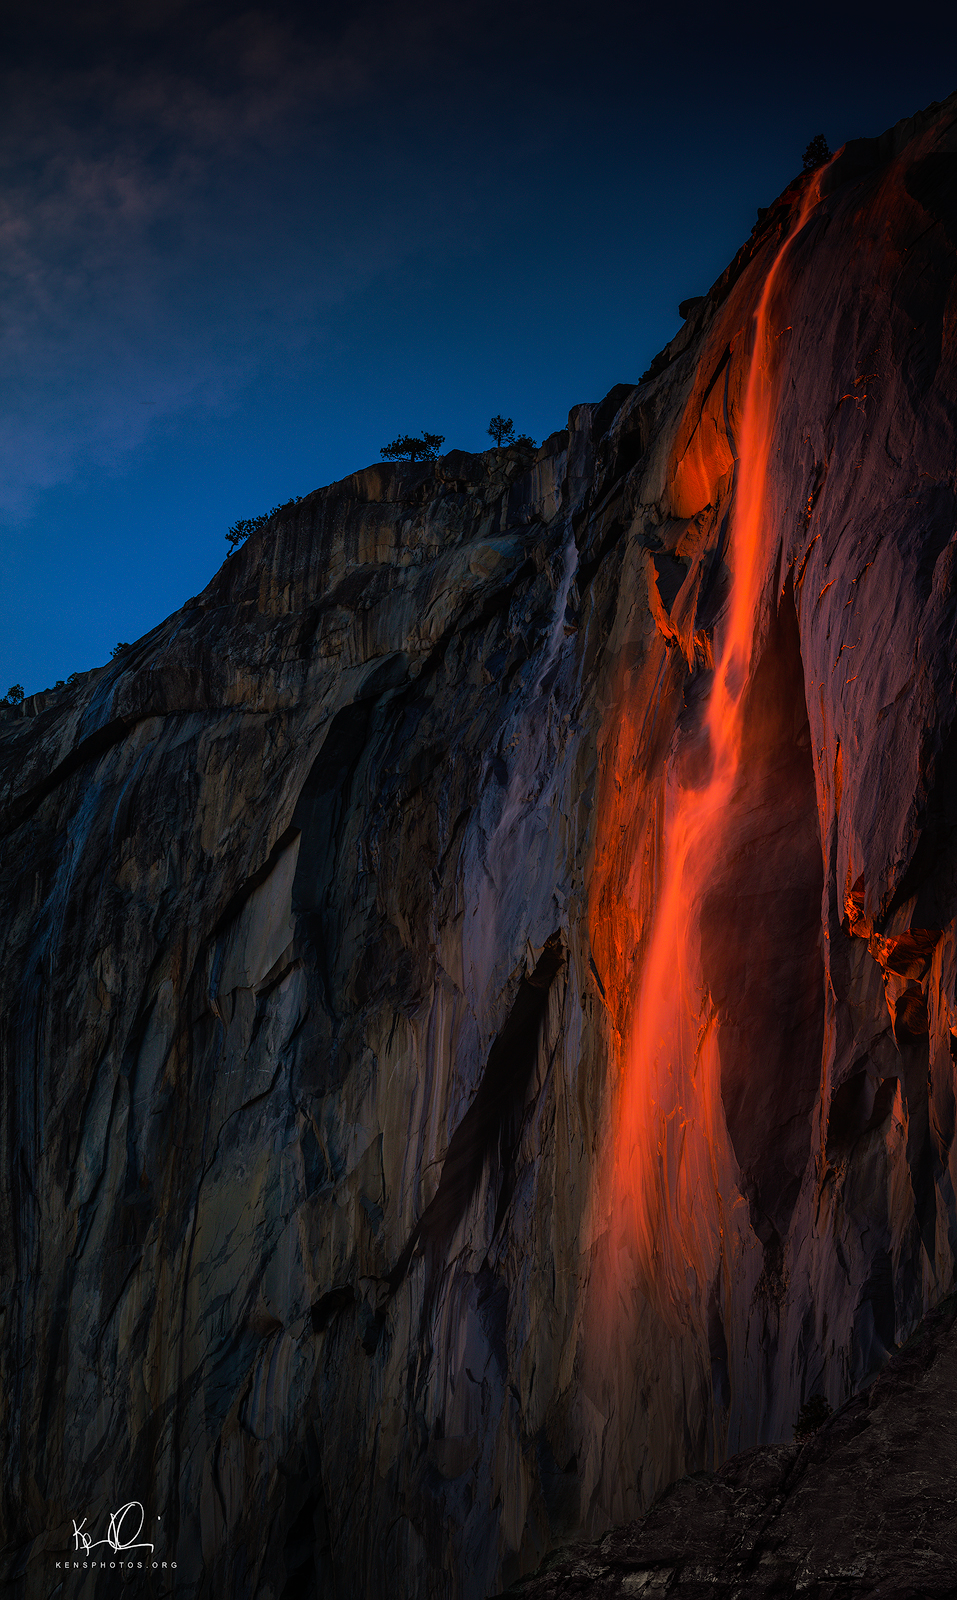   HORSETAIL FALLS. &nbsp;YOSEMITE. &nbsp;&nbsp;FOR A FEW DAYS EACH YEAR THE JUXTAPOSITION OF THE SUN AND THE MOUNTAIN CREATES THIS "FIREFALL." 